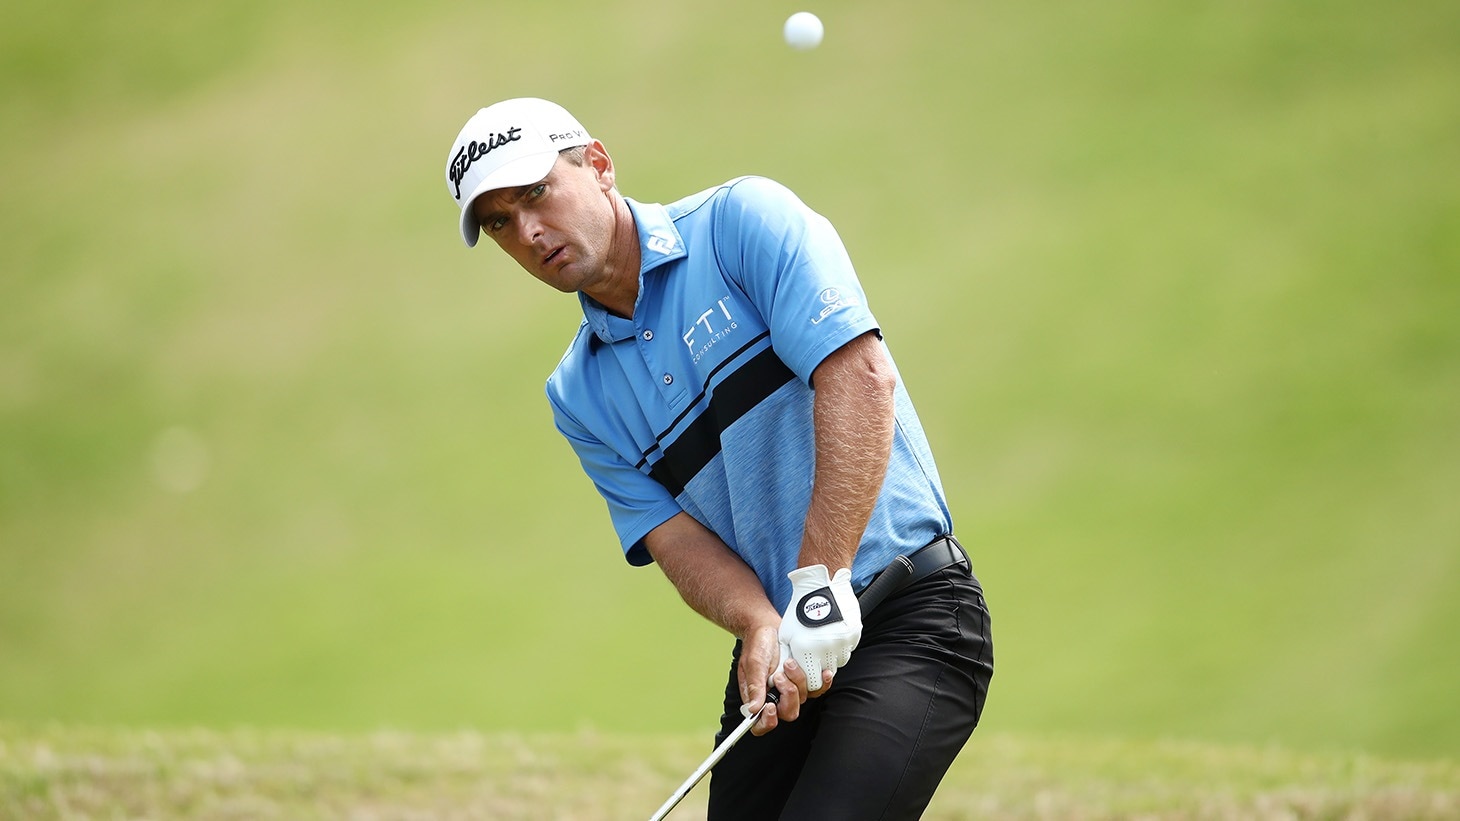 Charles Howell III hits a chip shot with his Vokey SM7 lob wedge at the 2019 Masters